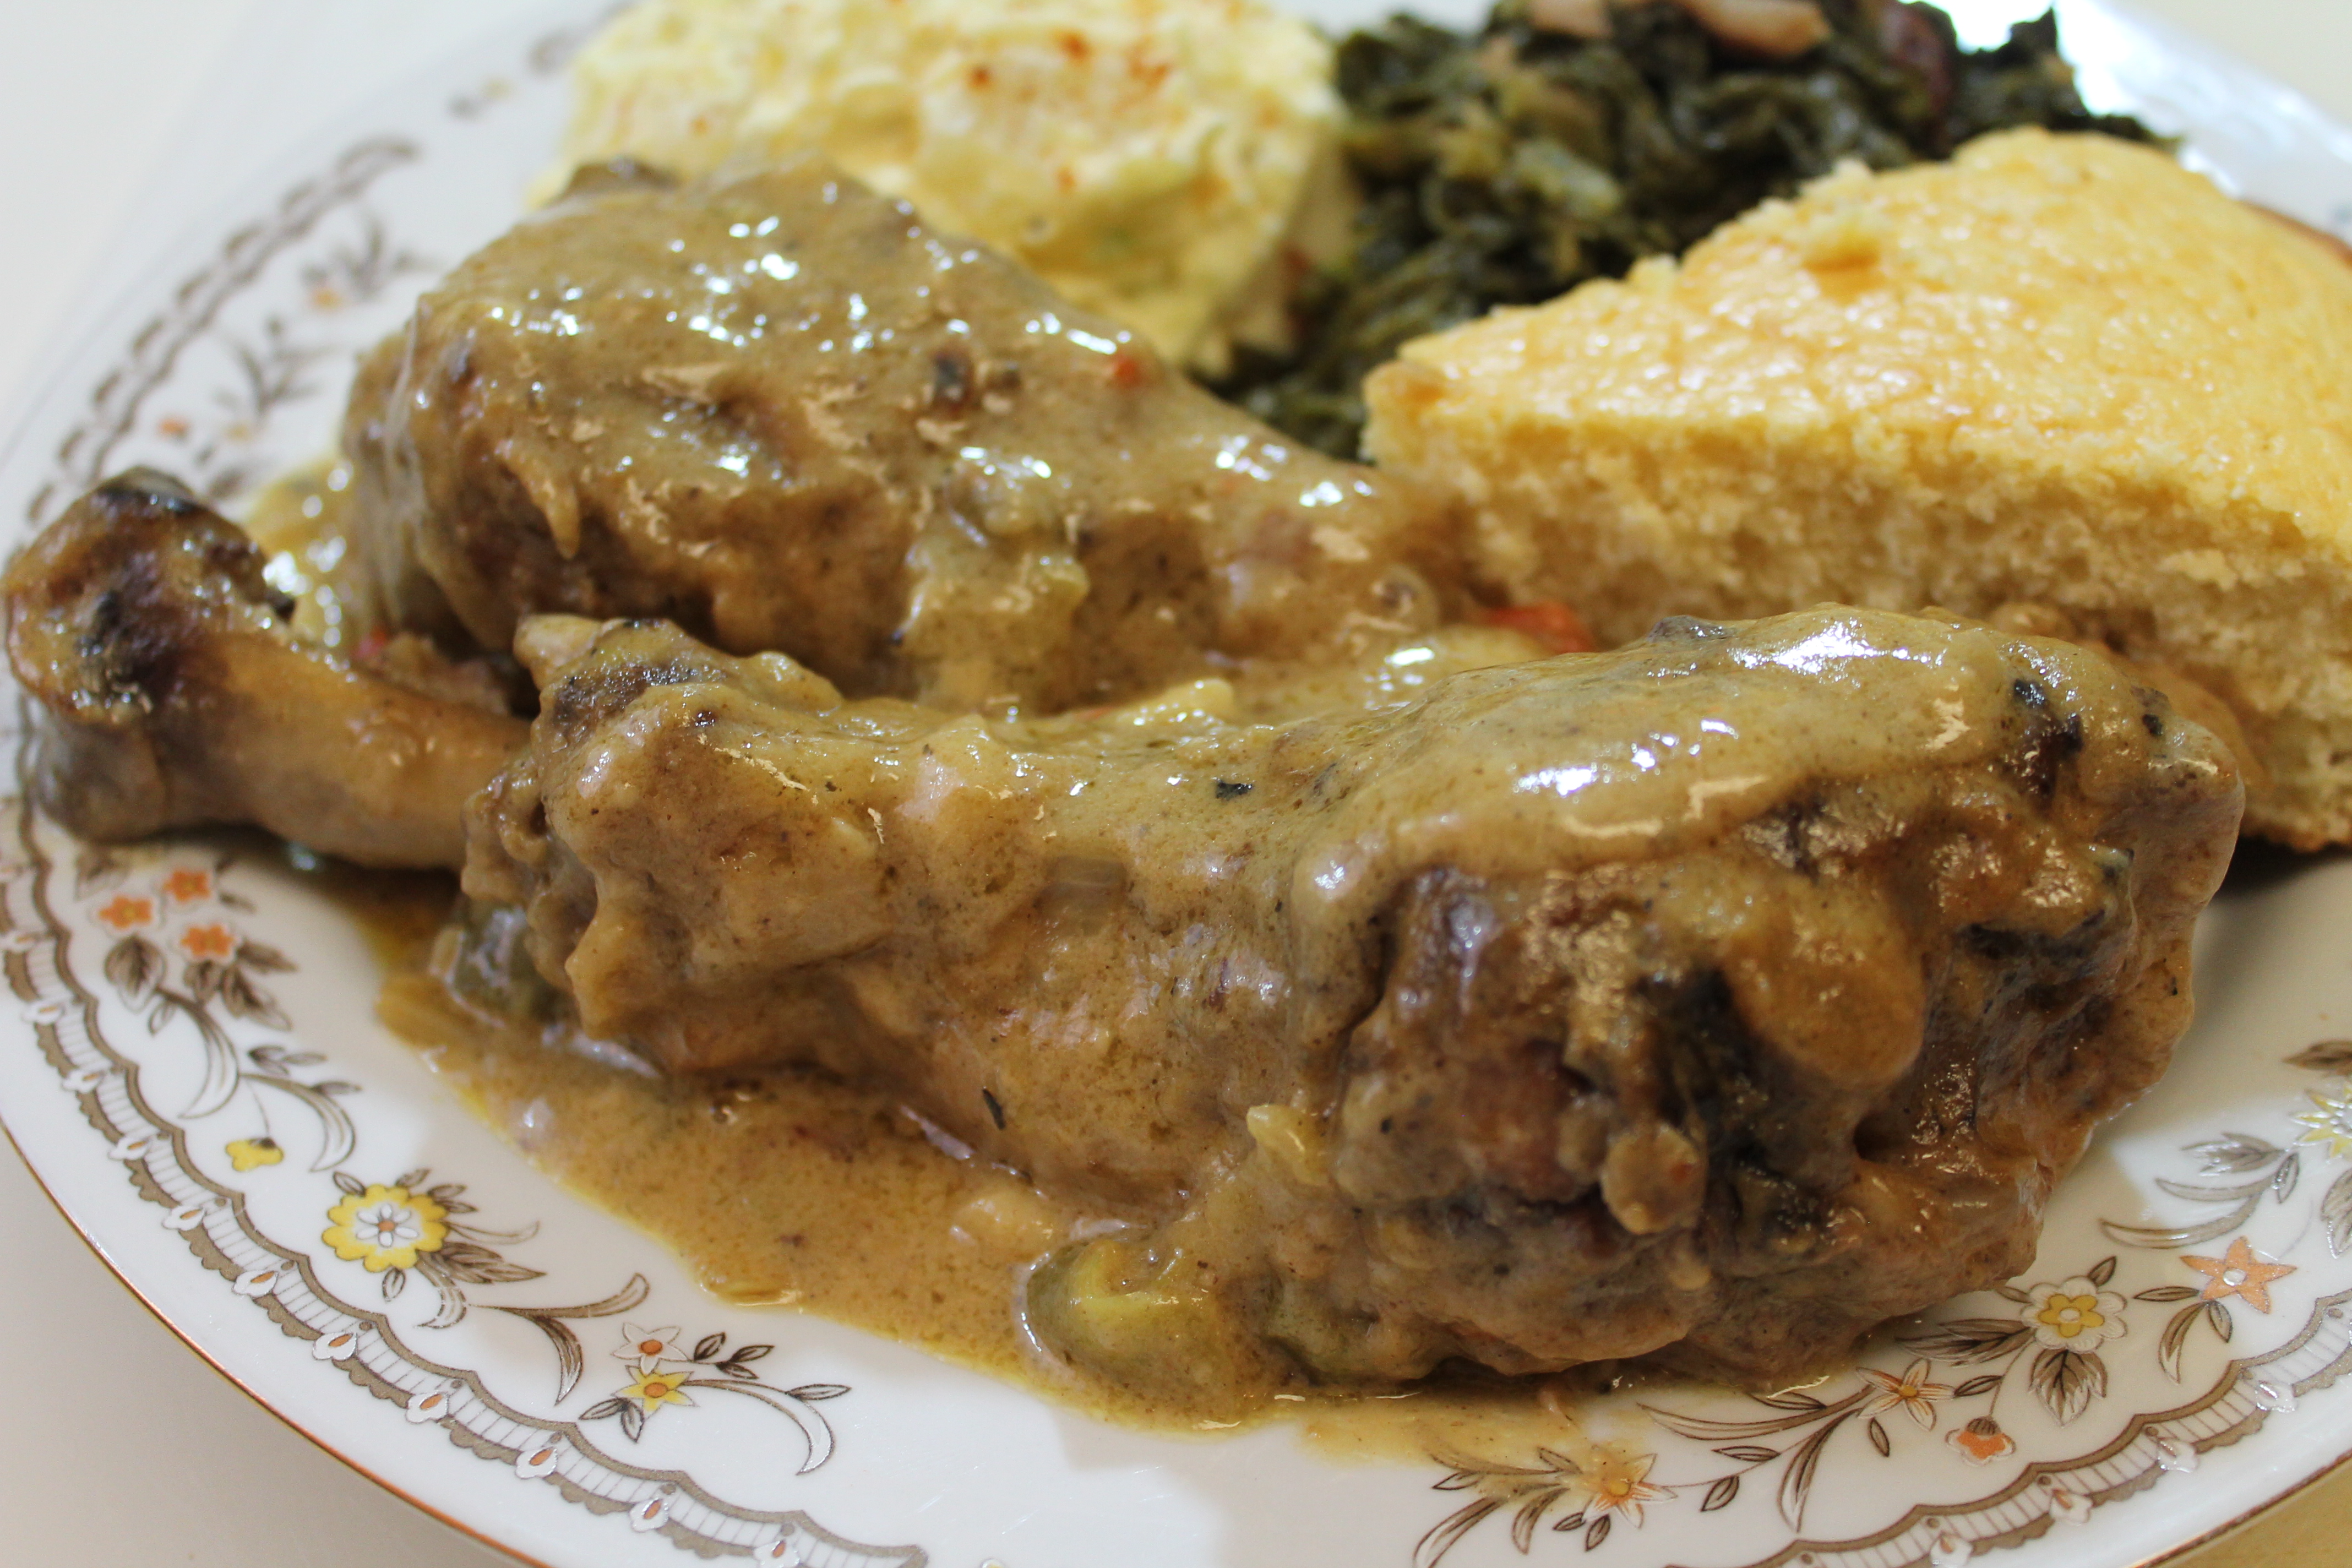 Southern Smothered Turkey I Heart Recipes,Marscapone Cheese